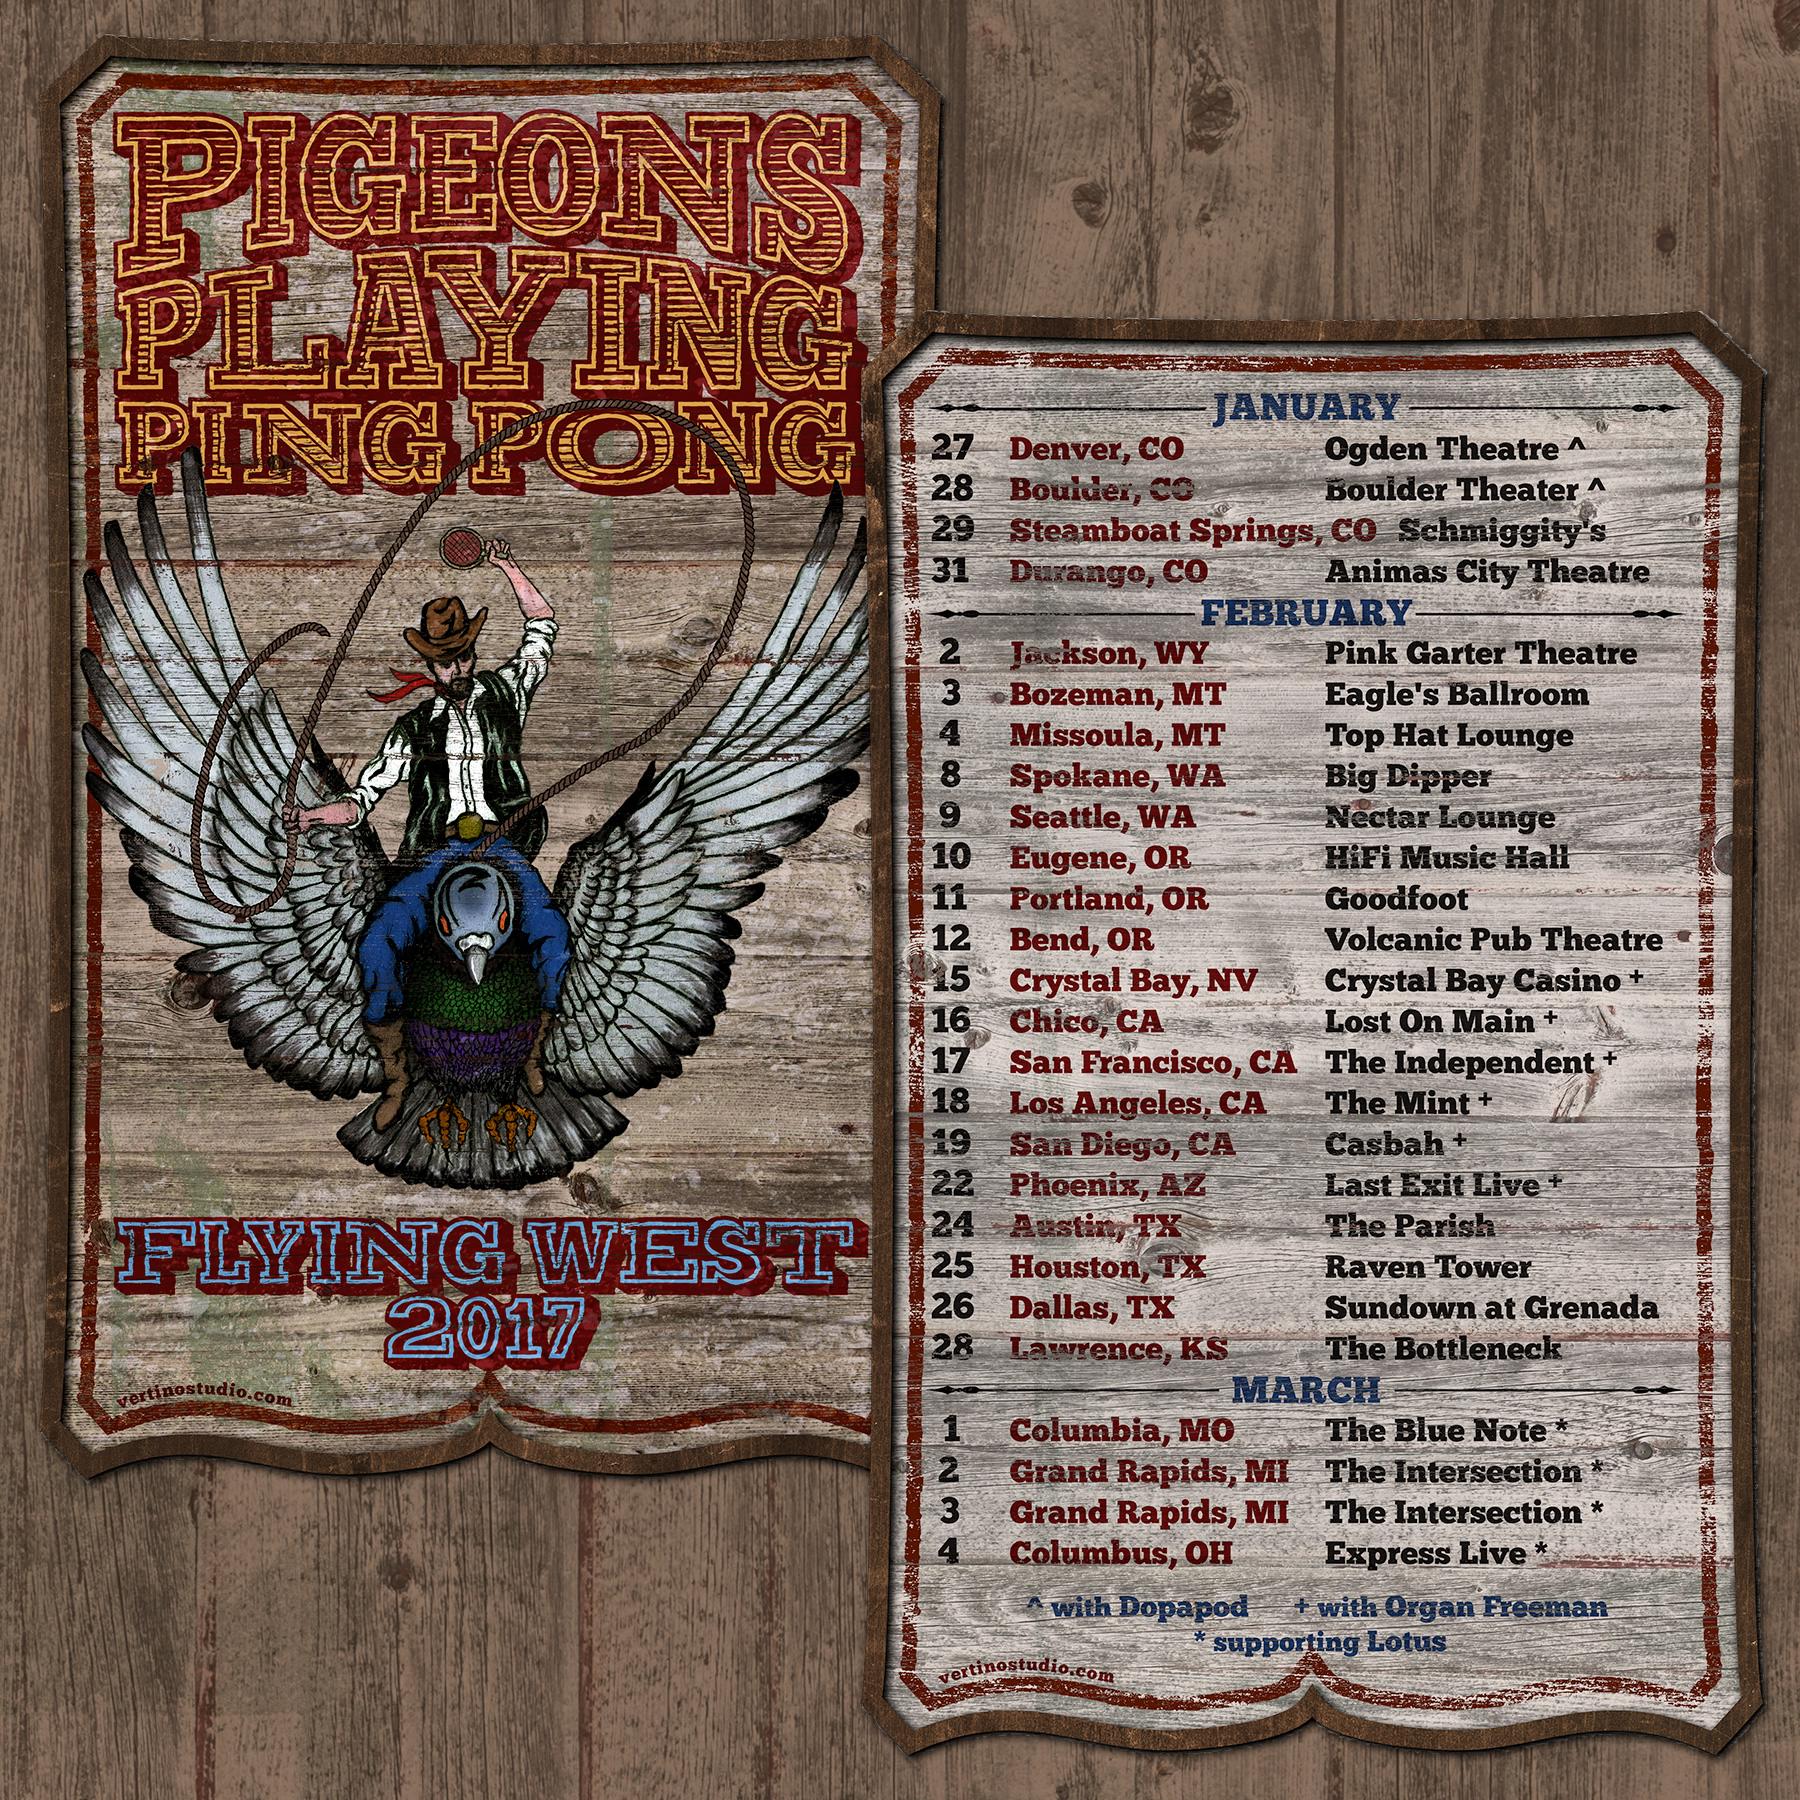 Pigeons Playing Ping Pong Announces "Flying West 2017" Tour Dates